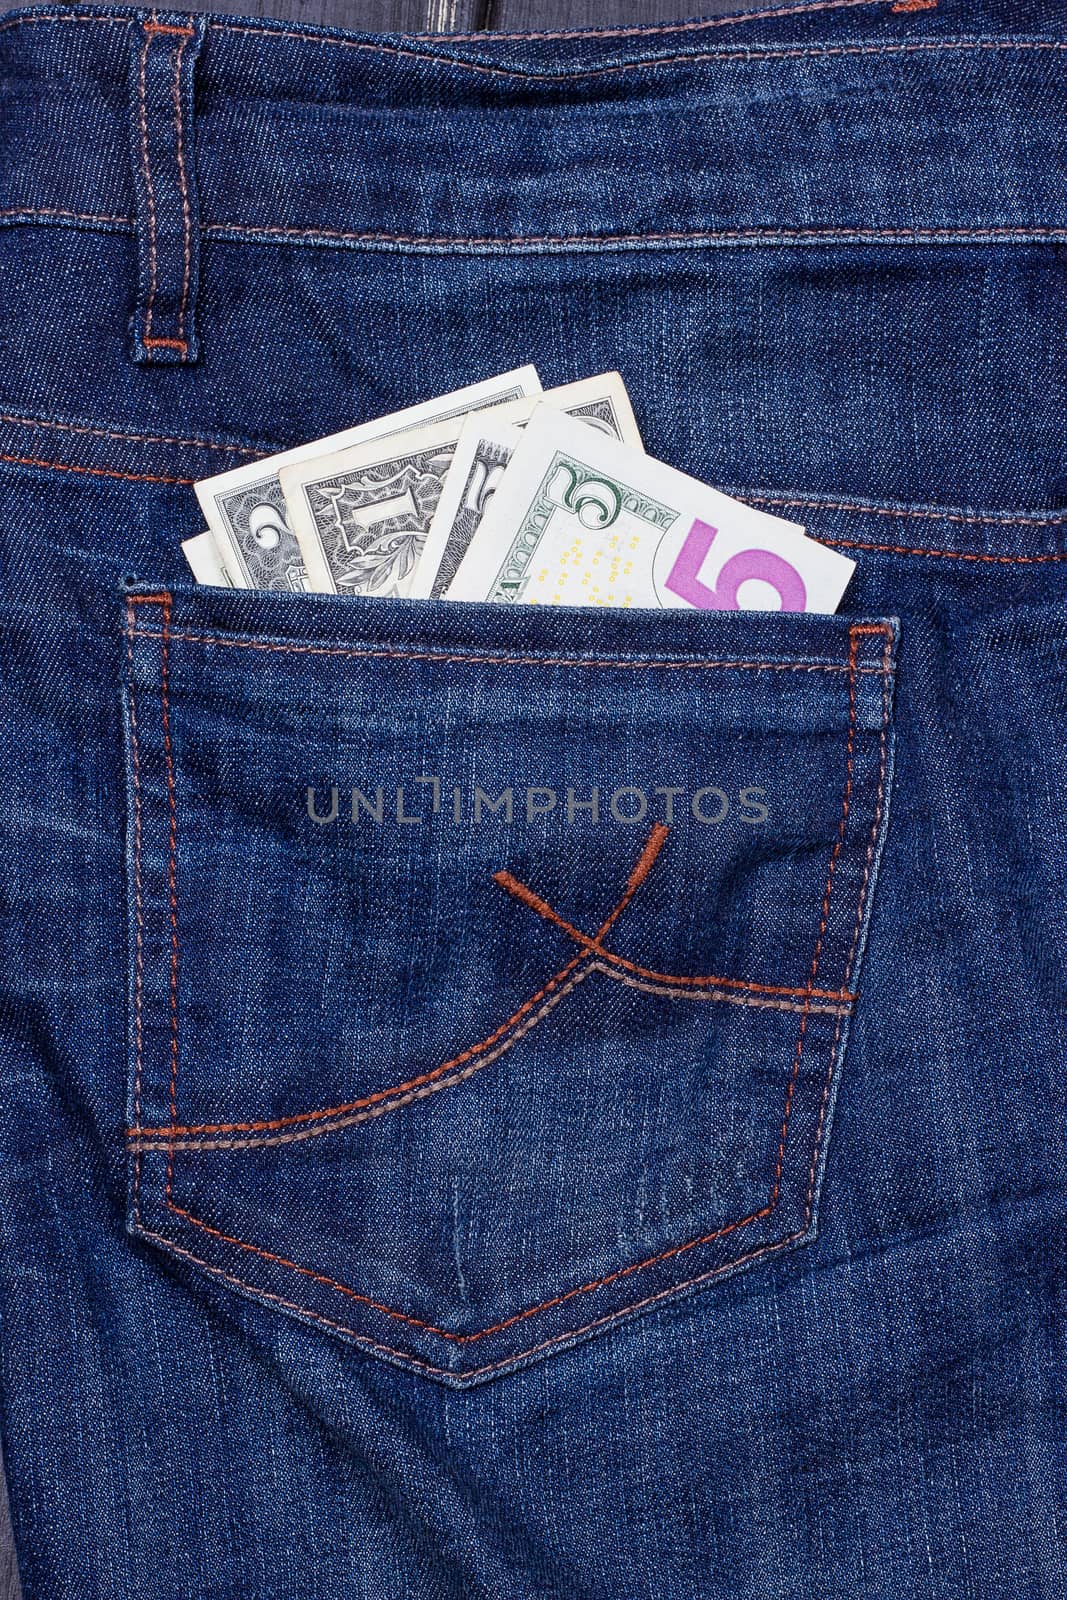 dollars in a pocket of jeans by victosha